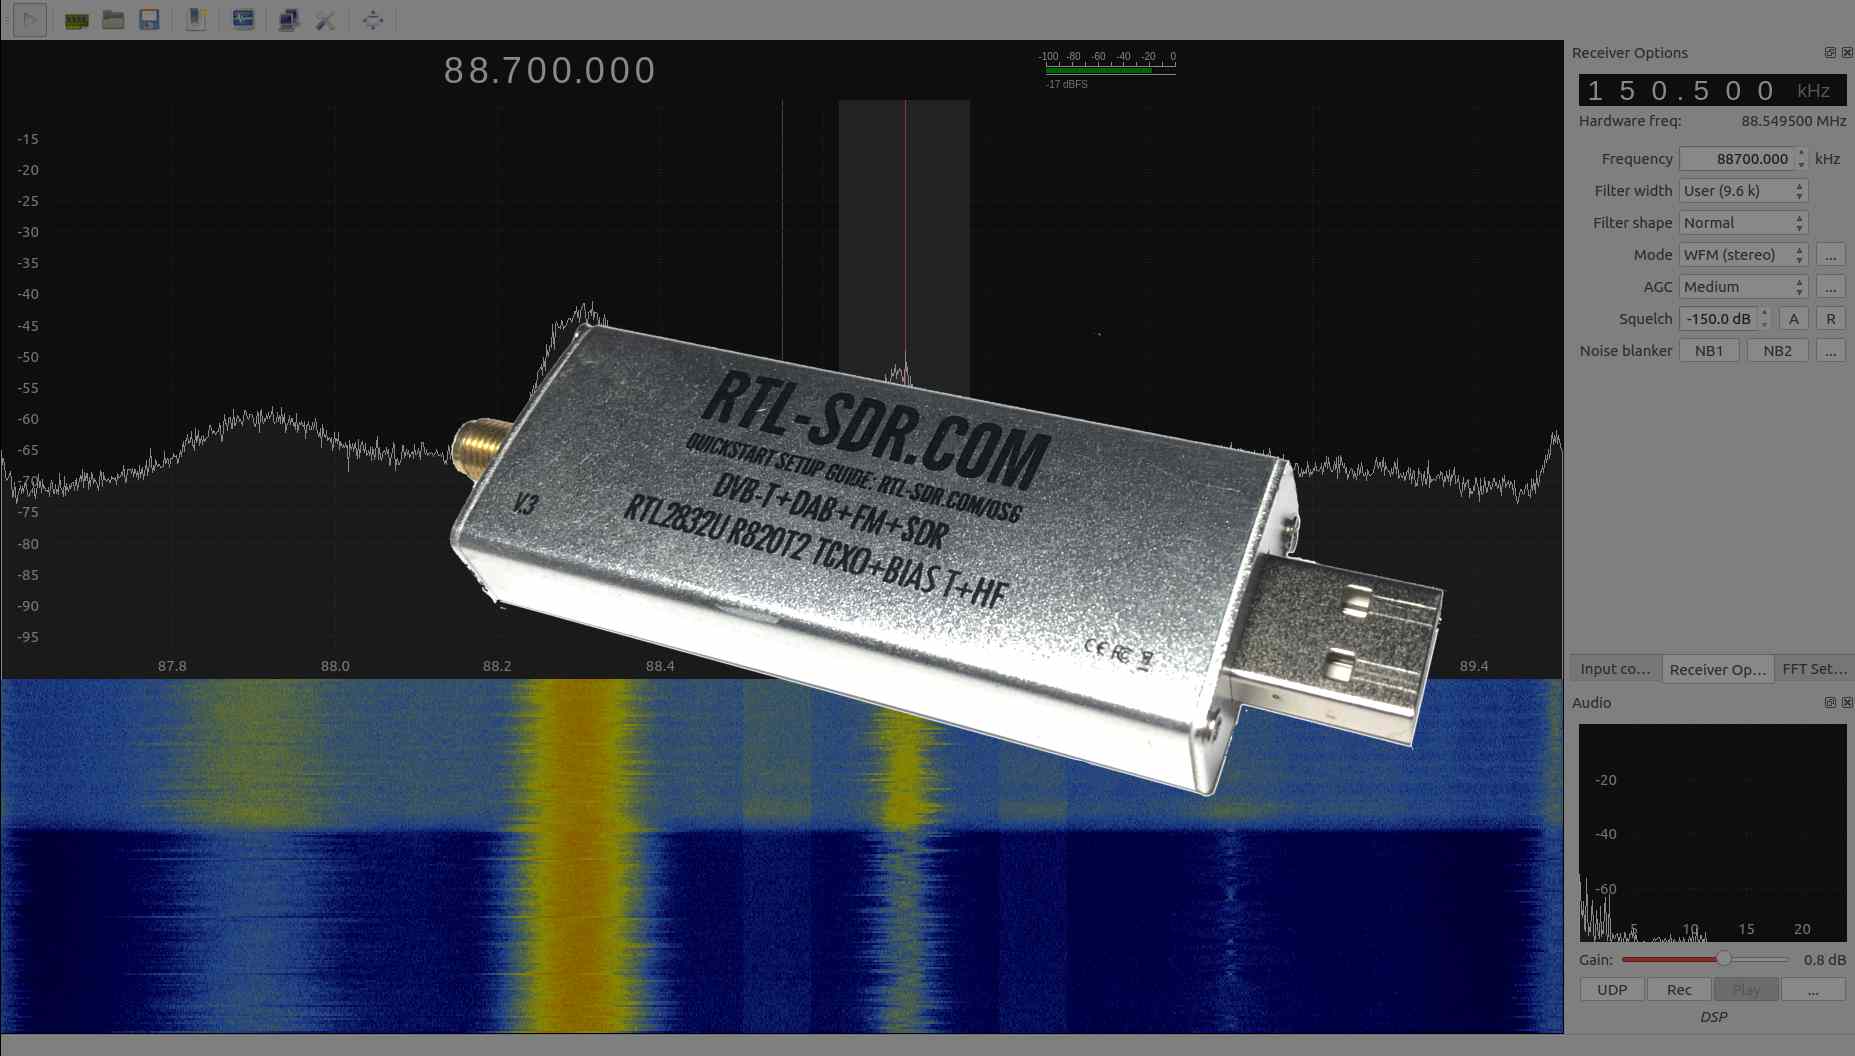 19 RTL-SDR Dongles Reviewed